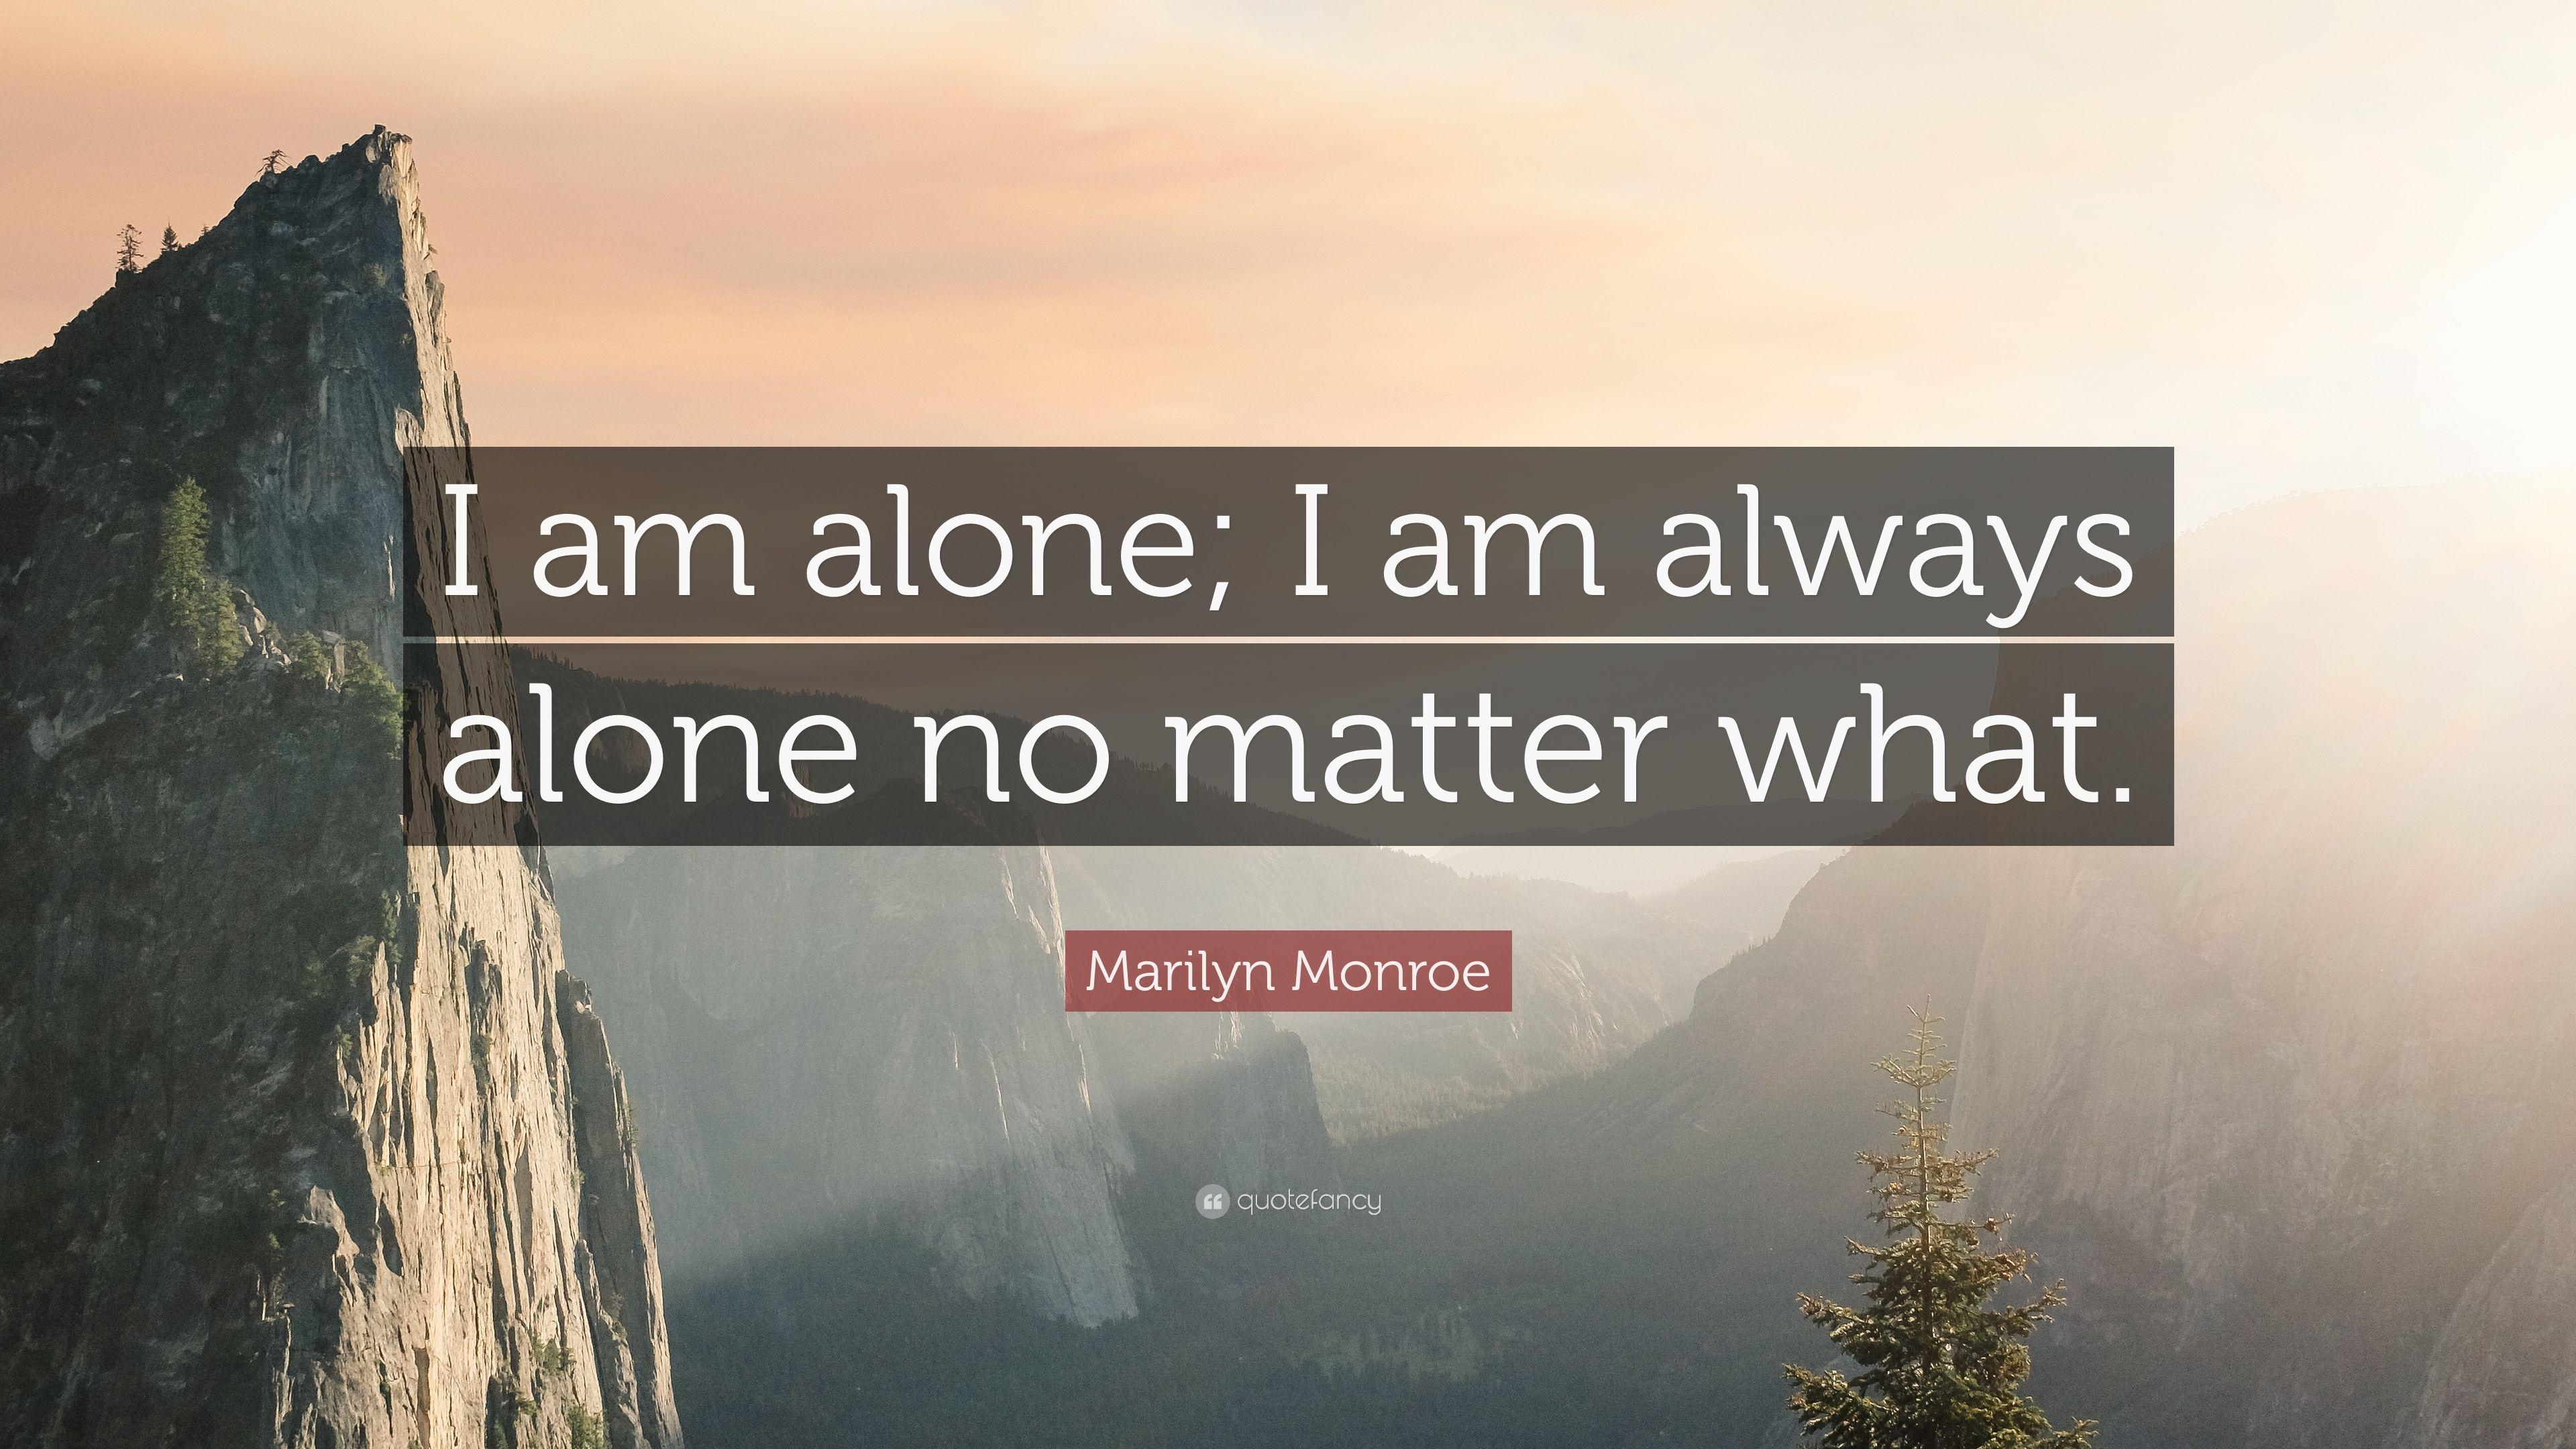 Marilyn Monroe Quote: “I am alone; I am always alone no matter what